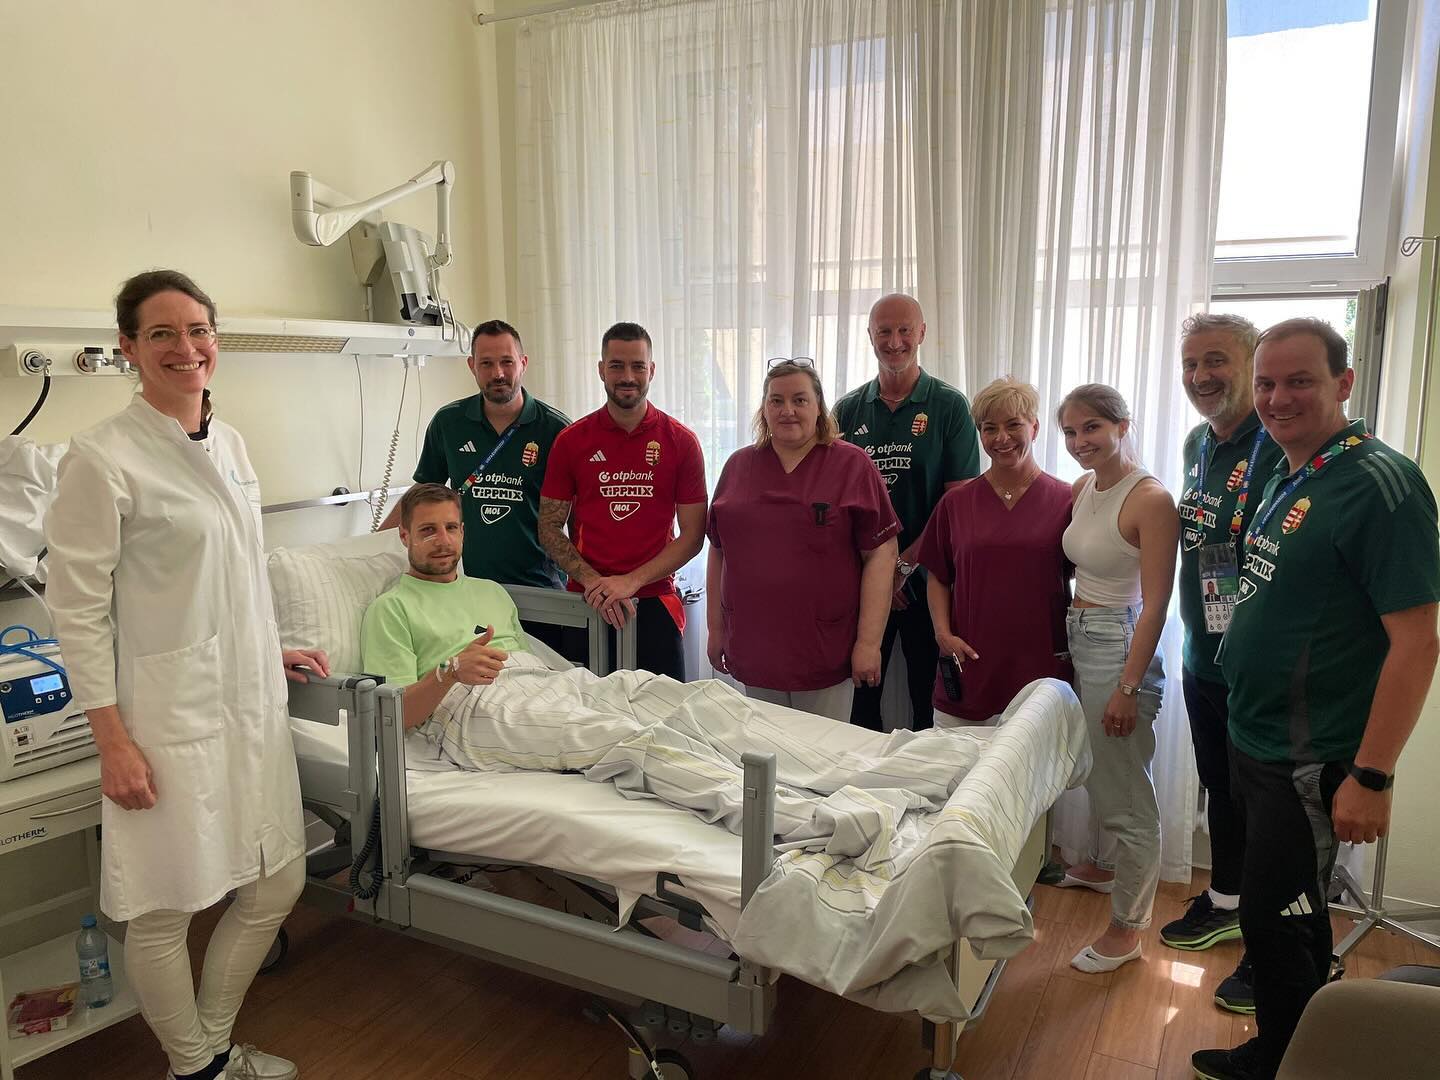 Barnabas Varga was sat up in hospital with his girlfriend and members of the Hungary staff